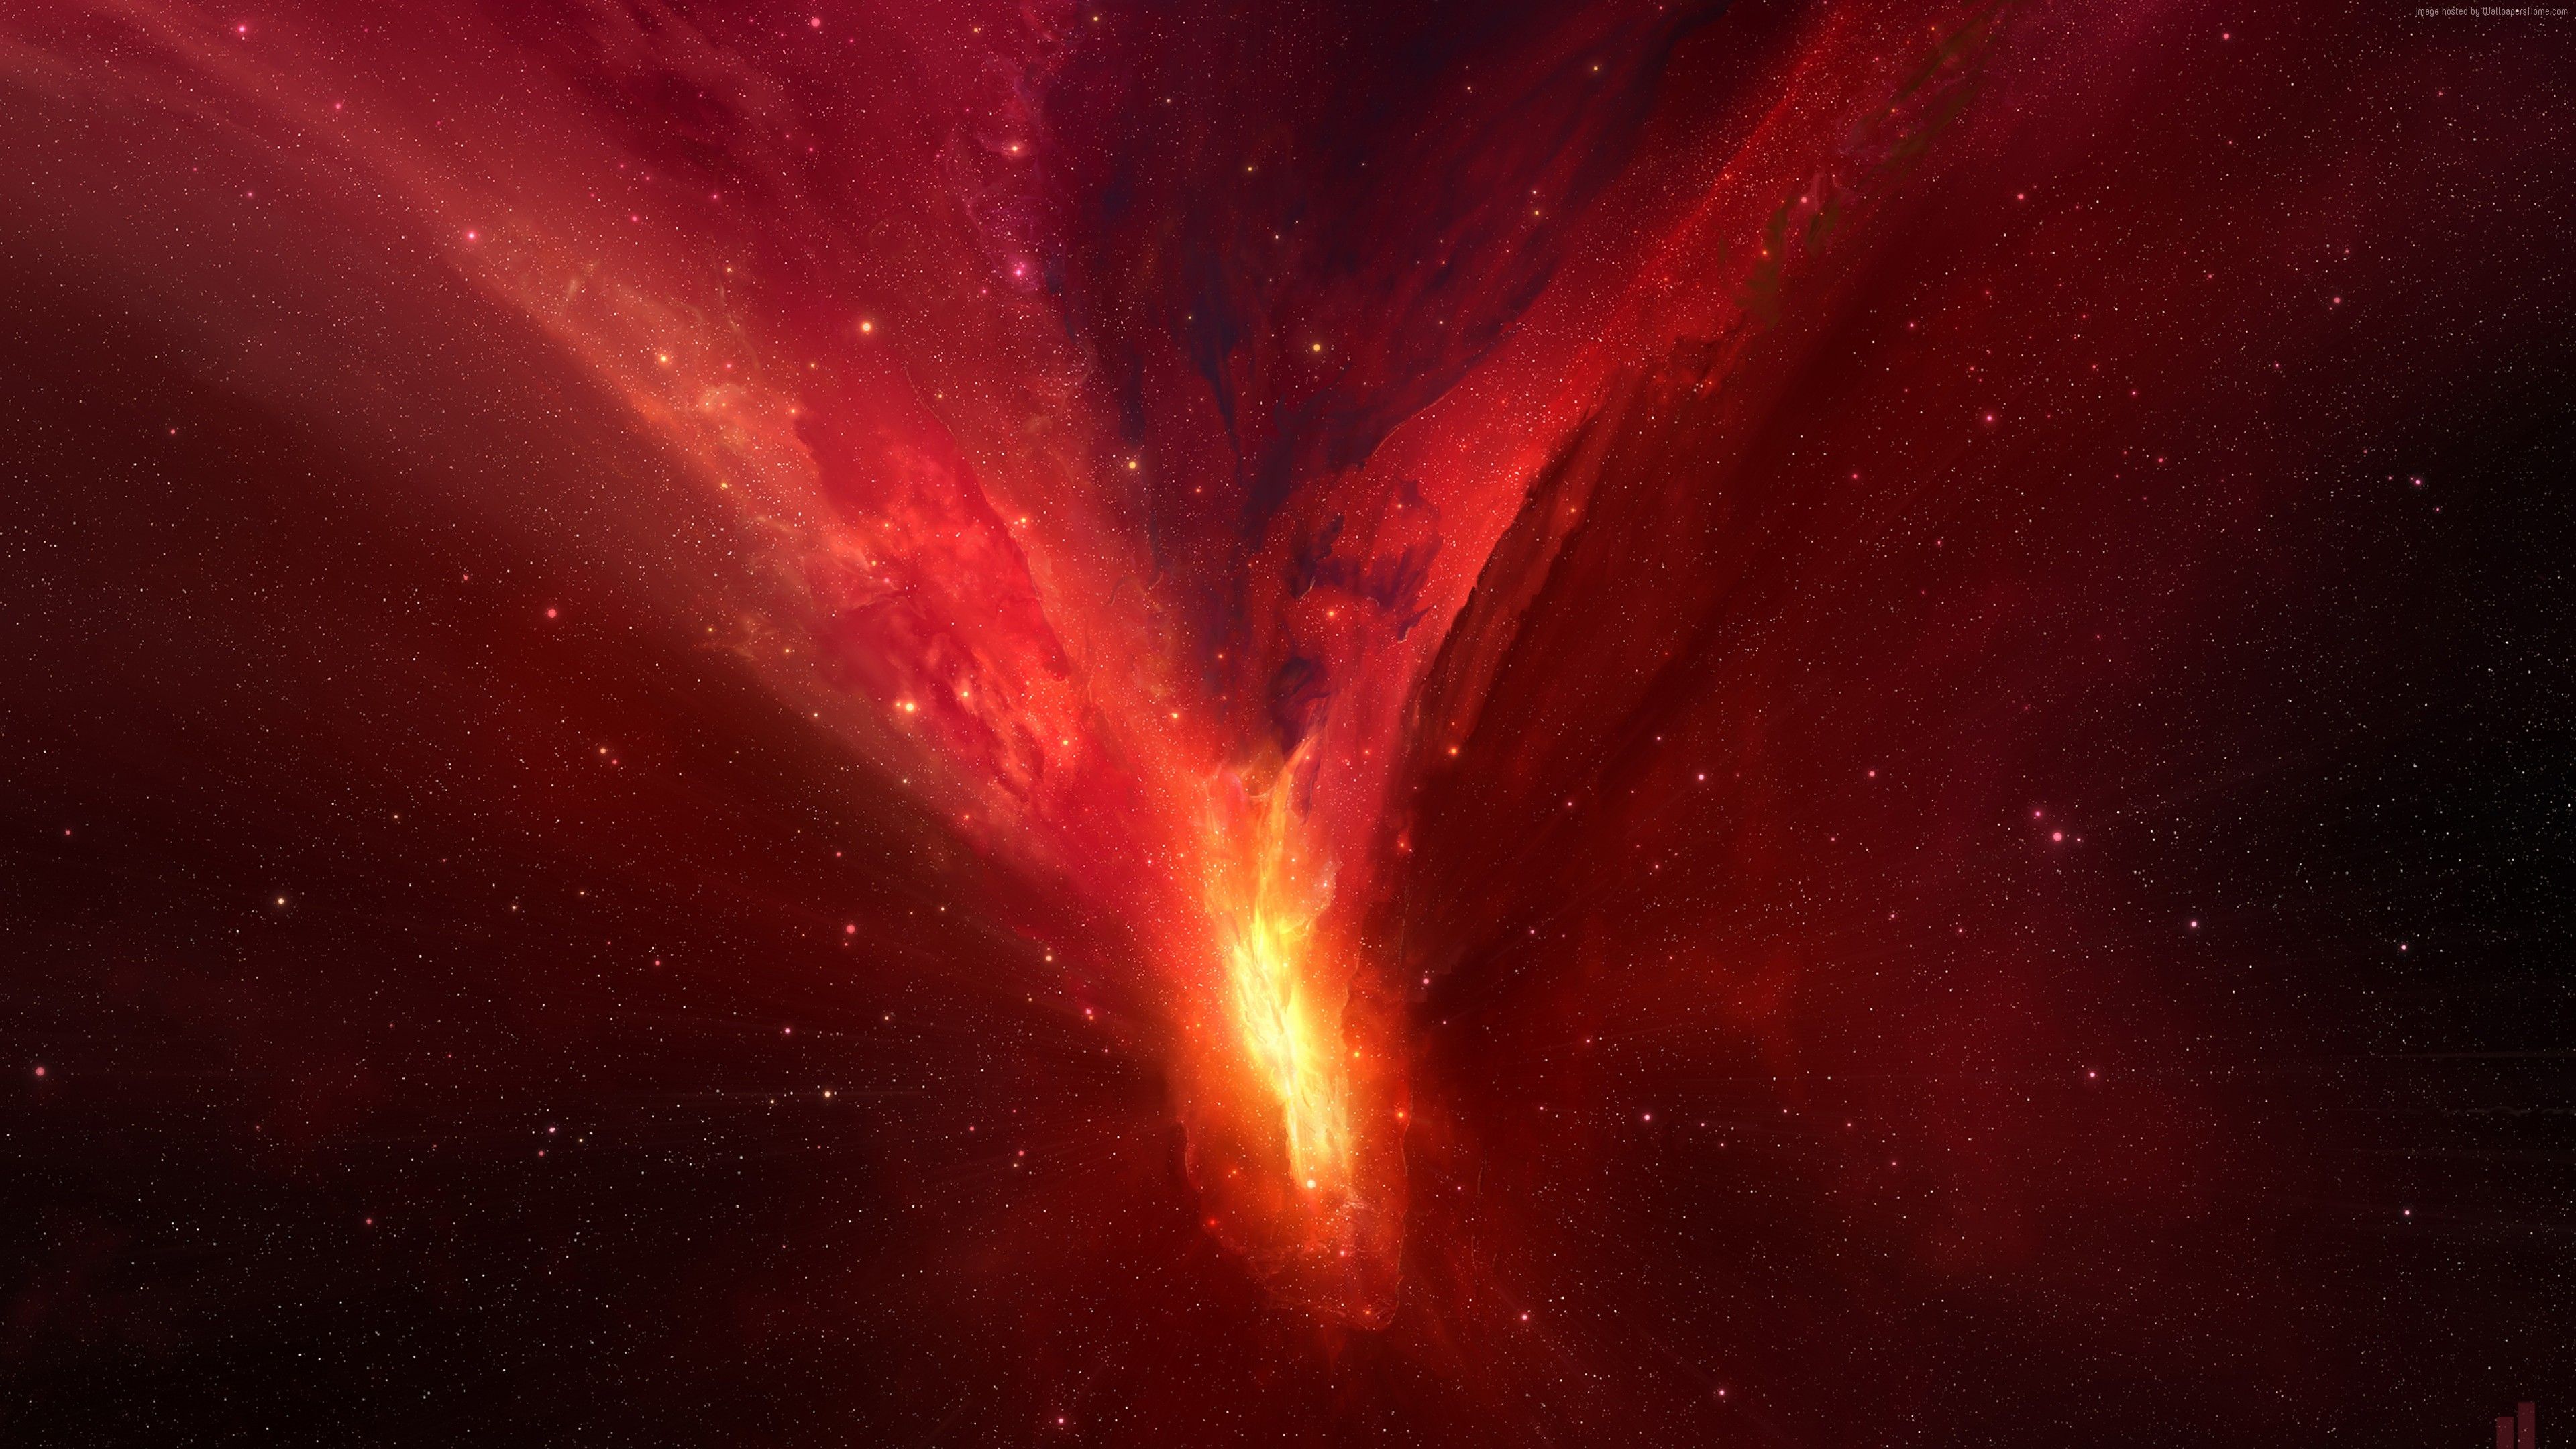 Wallpaper Horsehead Nebula, Red, HD, Space Space Wallpaper Horsehead Nebula Red Hd Space.. Horsehead Nebula, Nebula Wallpaper, Nebula